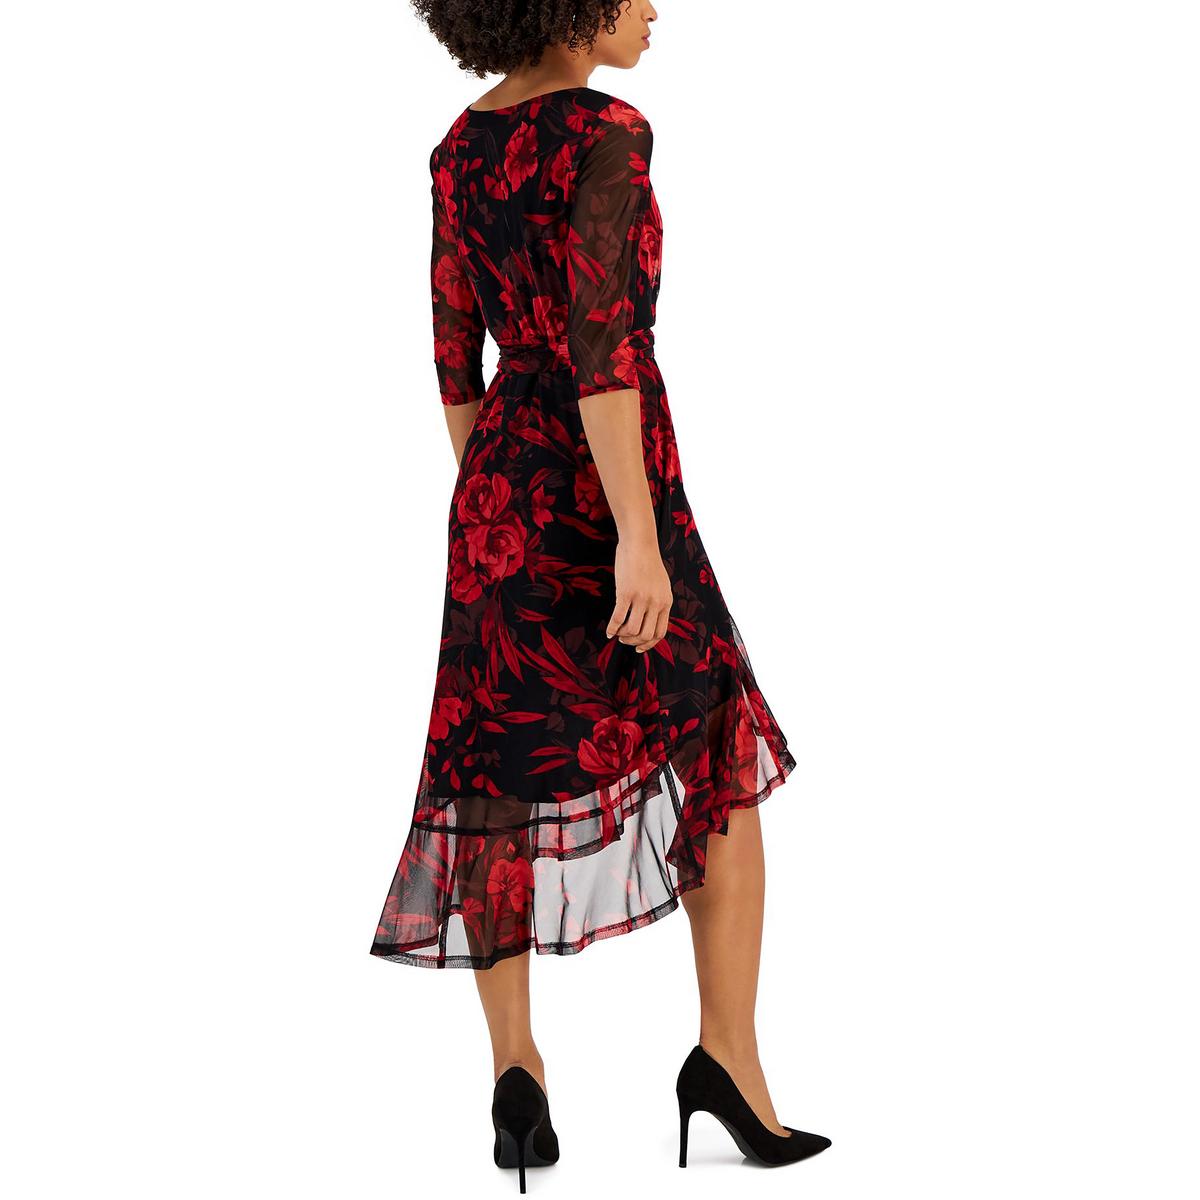 Connected Apparel Womens Mesh Floral Fit & Flare Dress